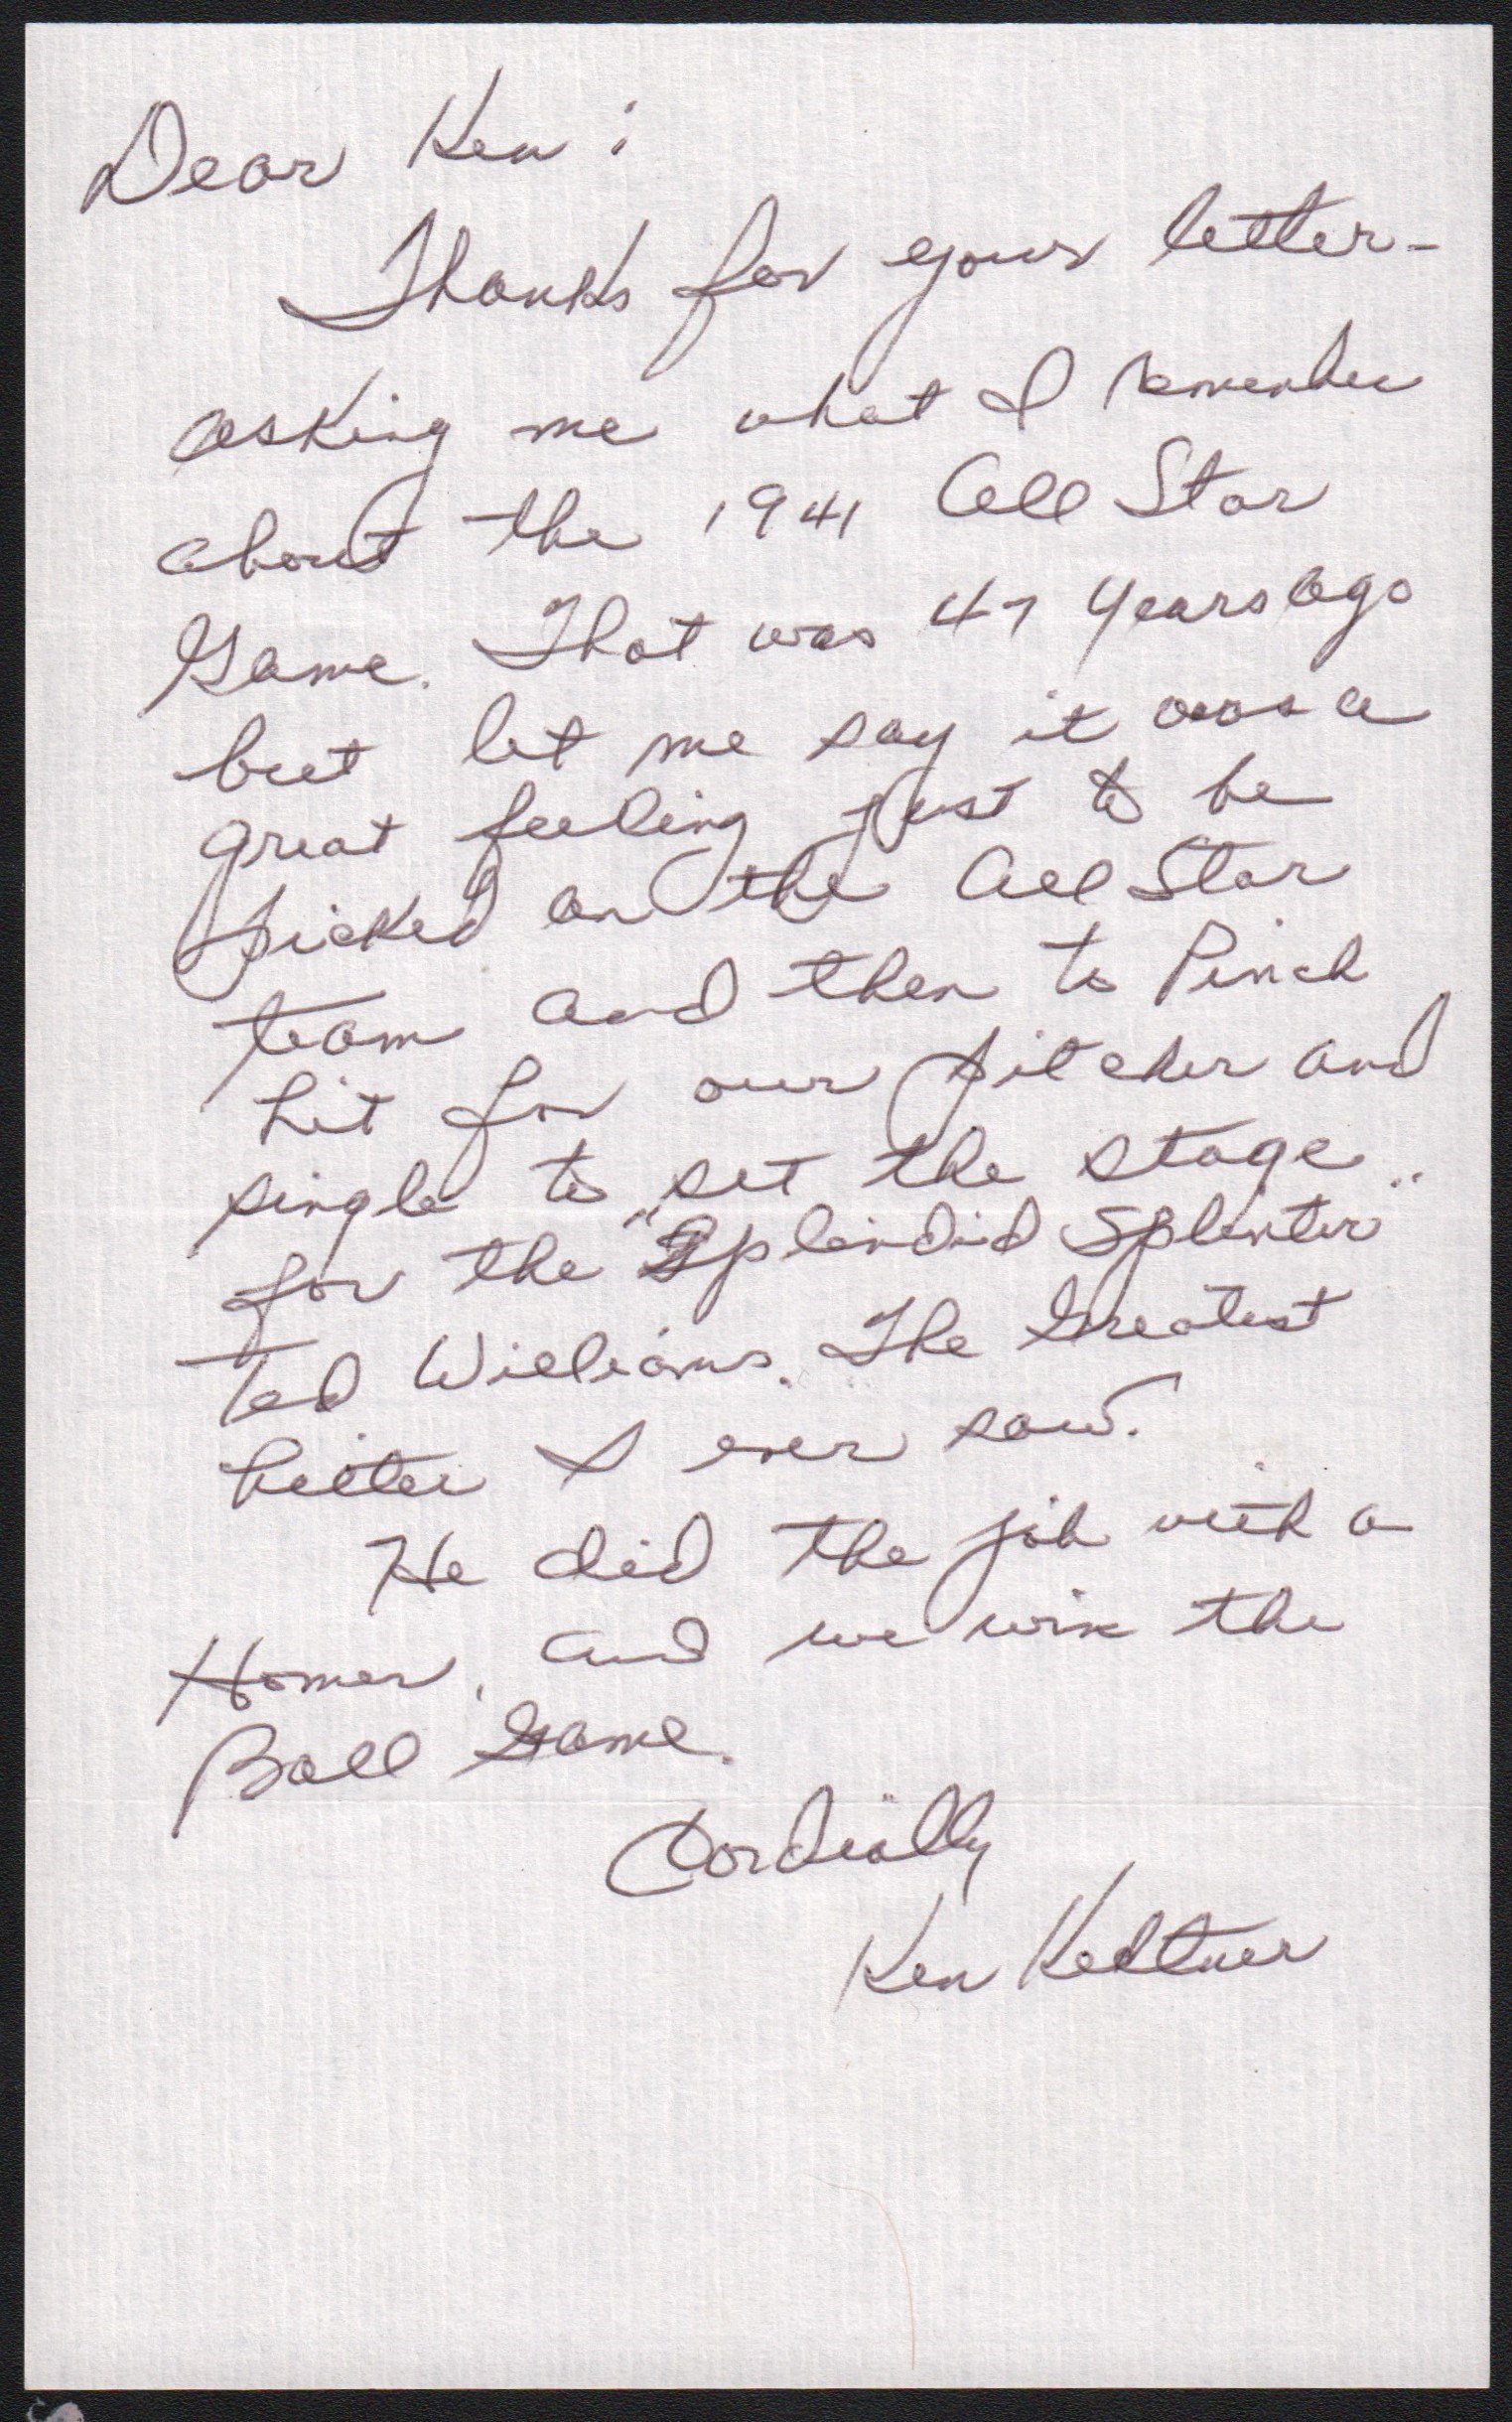 Ken Keltner Handwritten Letter with Ted Williams Famous 1941 All Star Game HR Content